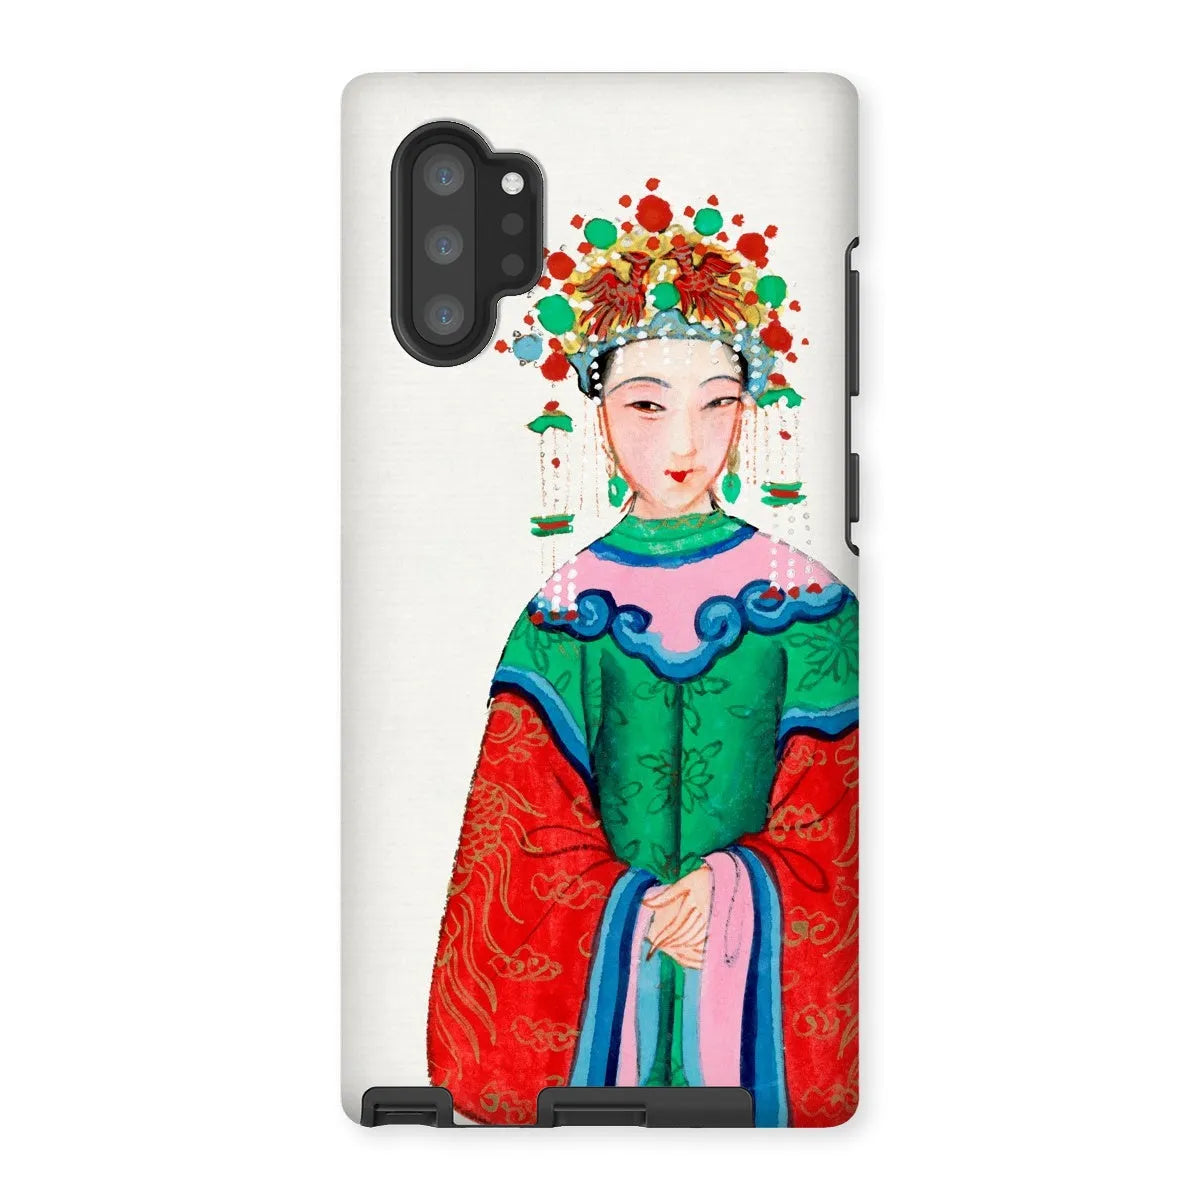 Imperial Princess - Chinese Aesthetic Painting Phone Case - Samsung Galaxy Note 10p / Matte - Mobile Phone Cases